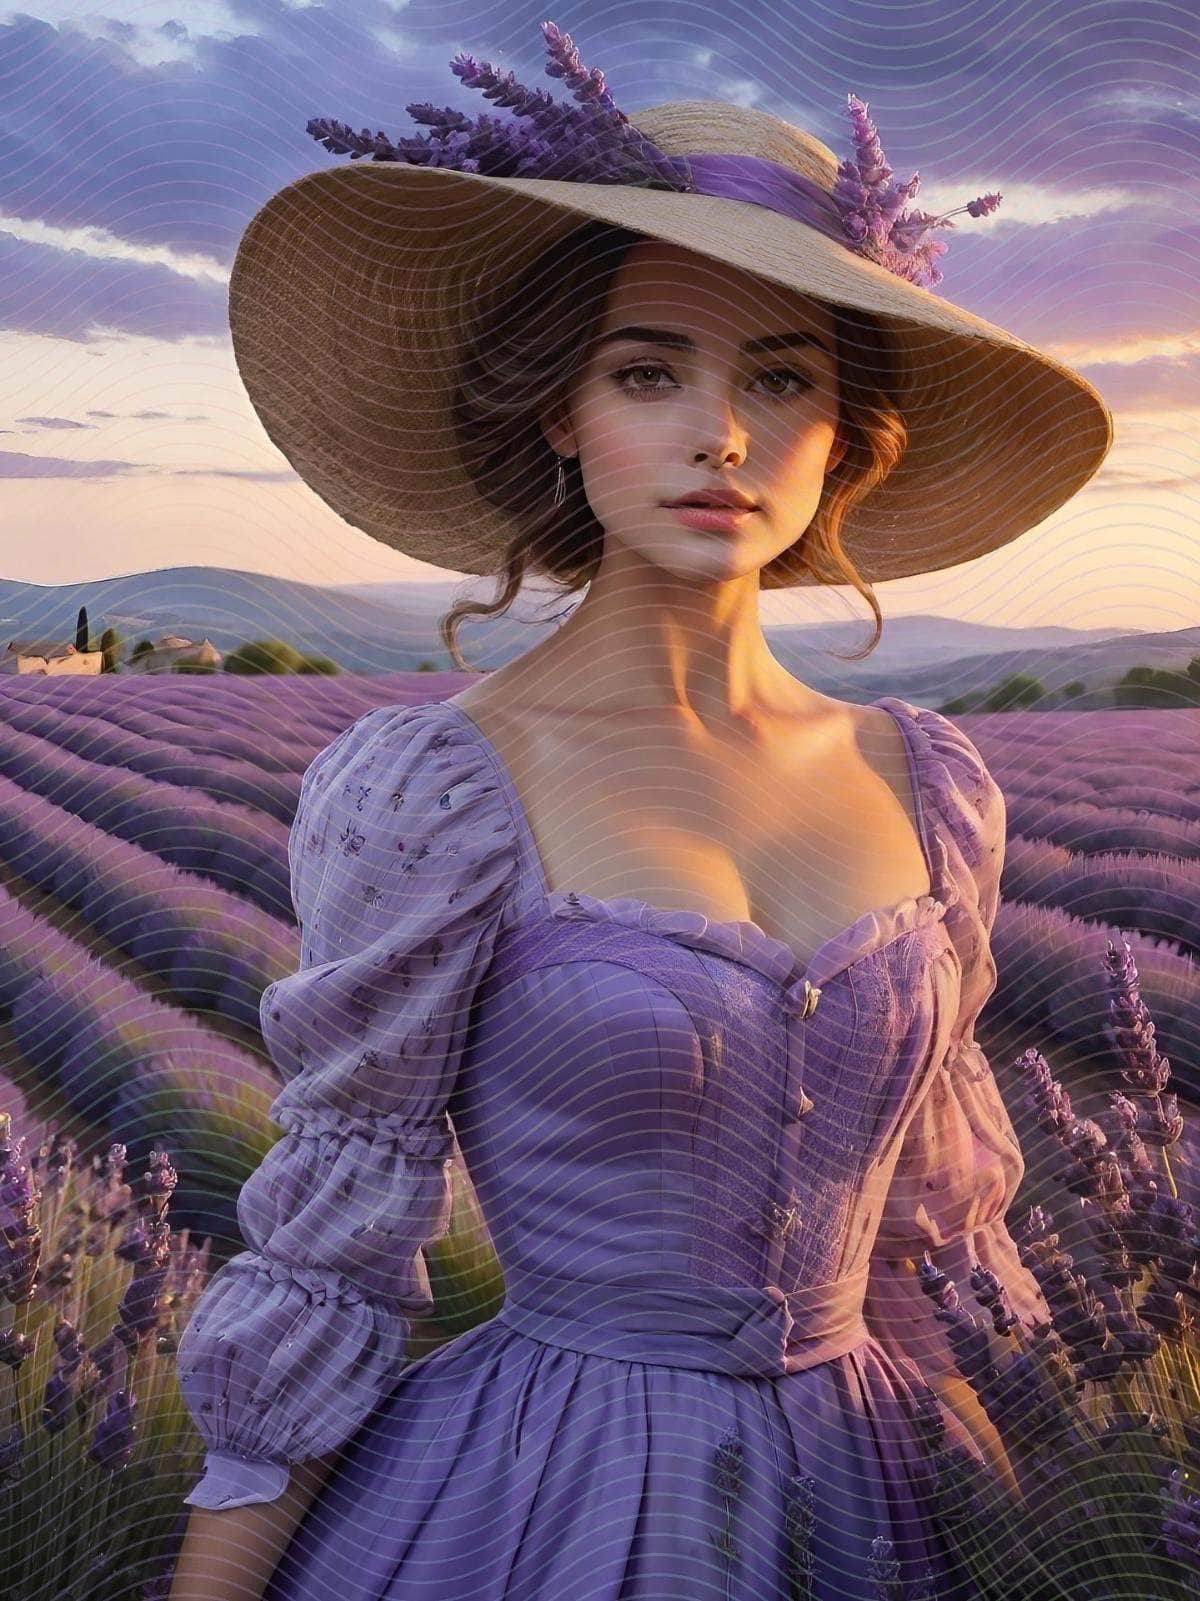 Woman in Purple Dress and Hat in a Lavender Field